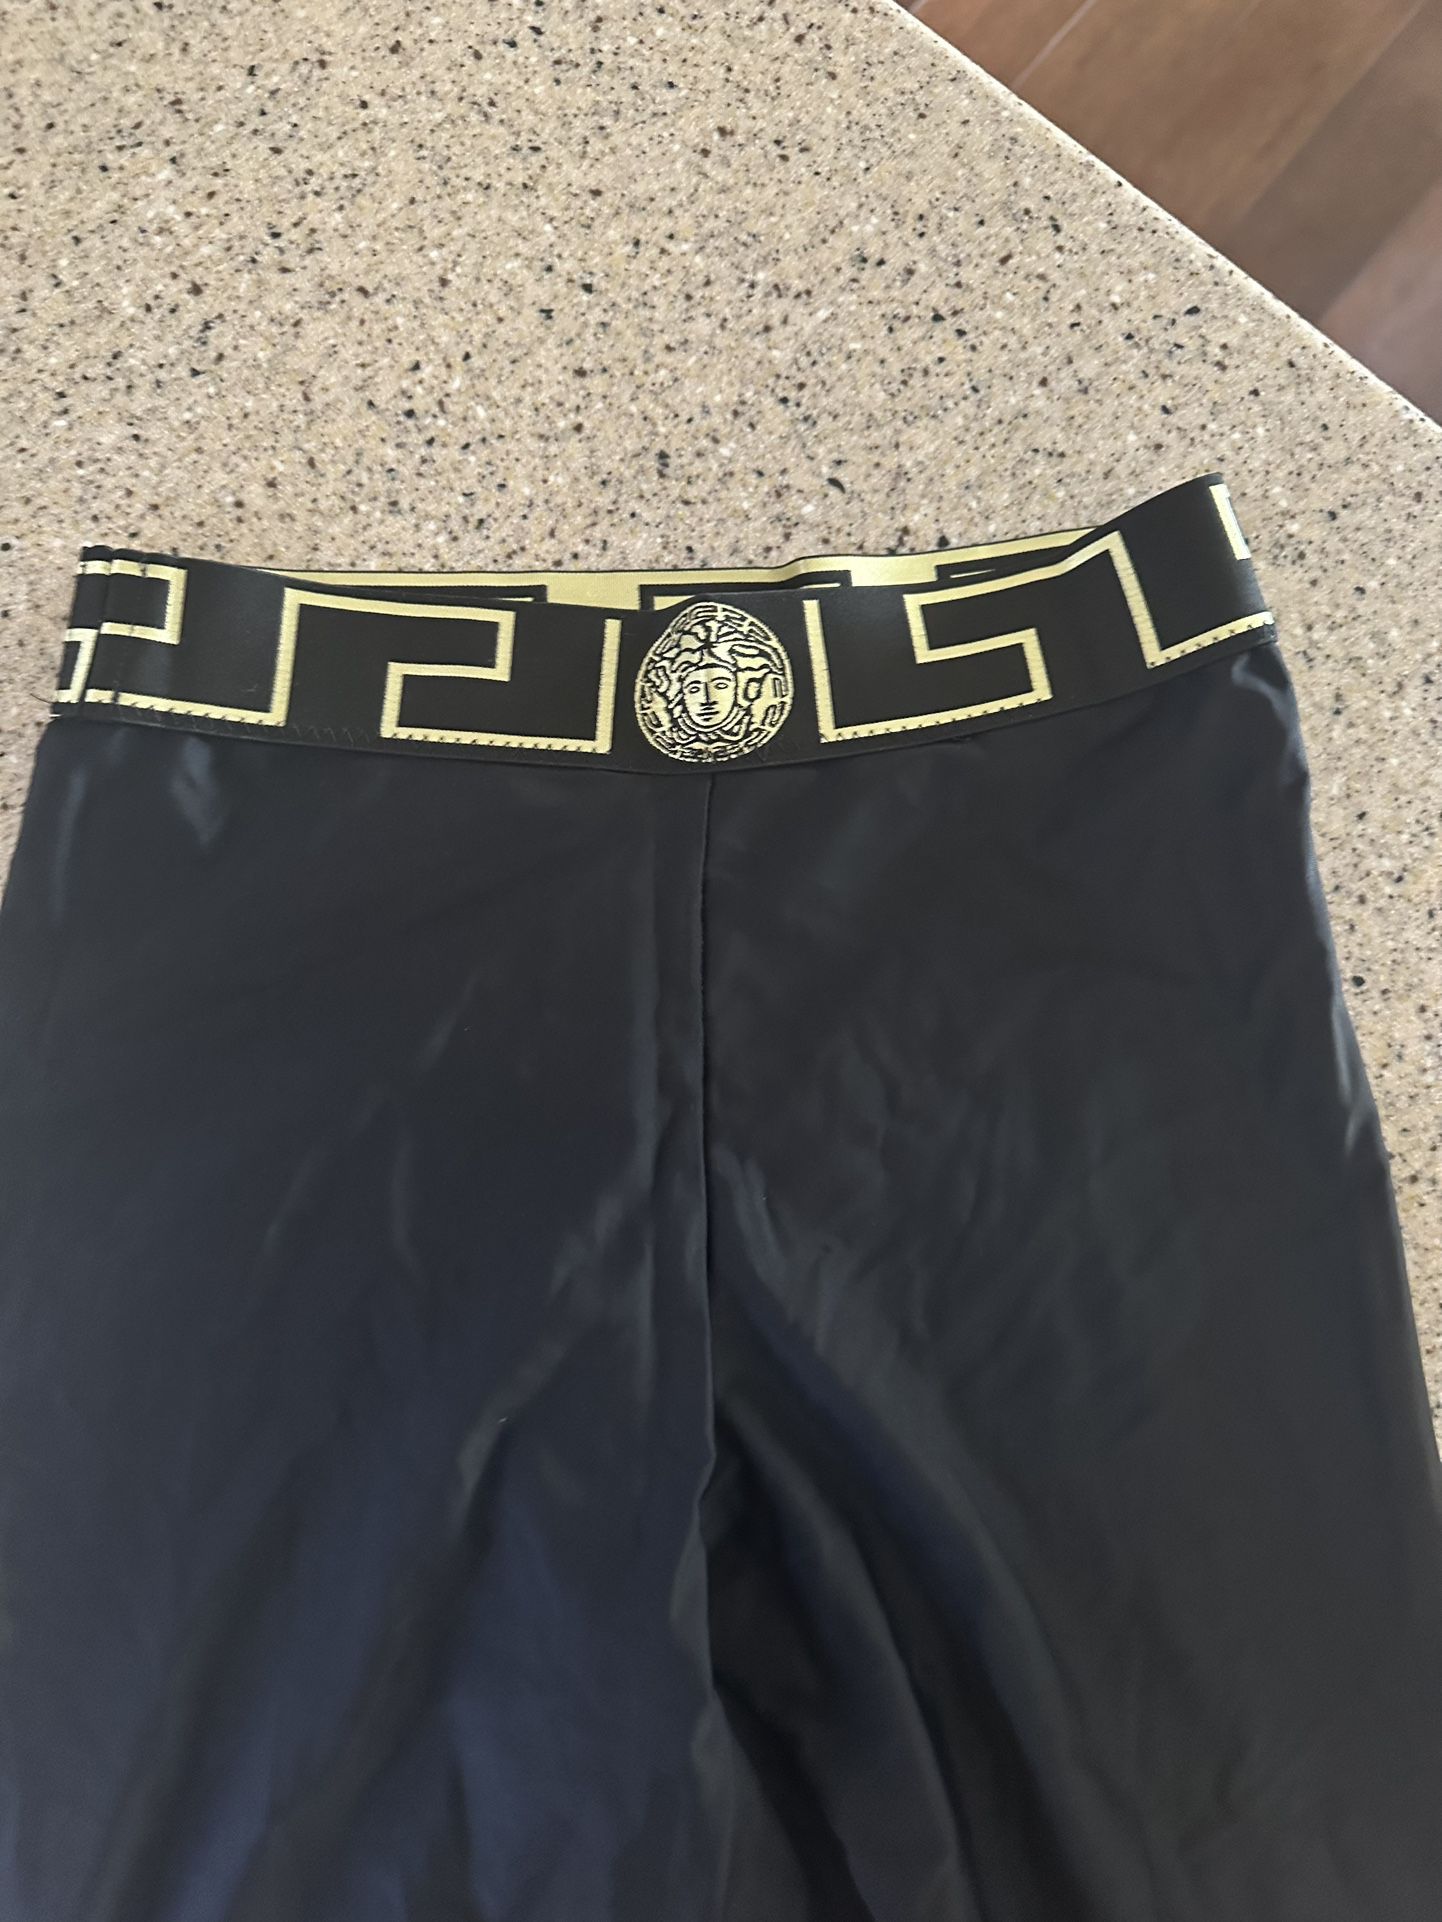 Logo Couture Versace Legging for Sale in Norwalk, CA - OfferUp